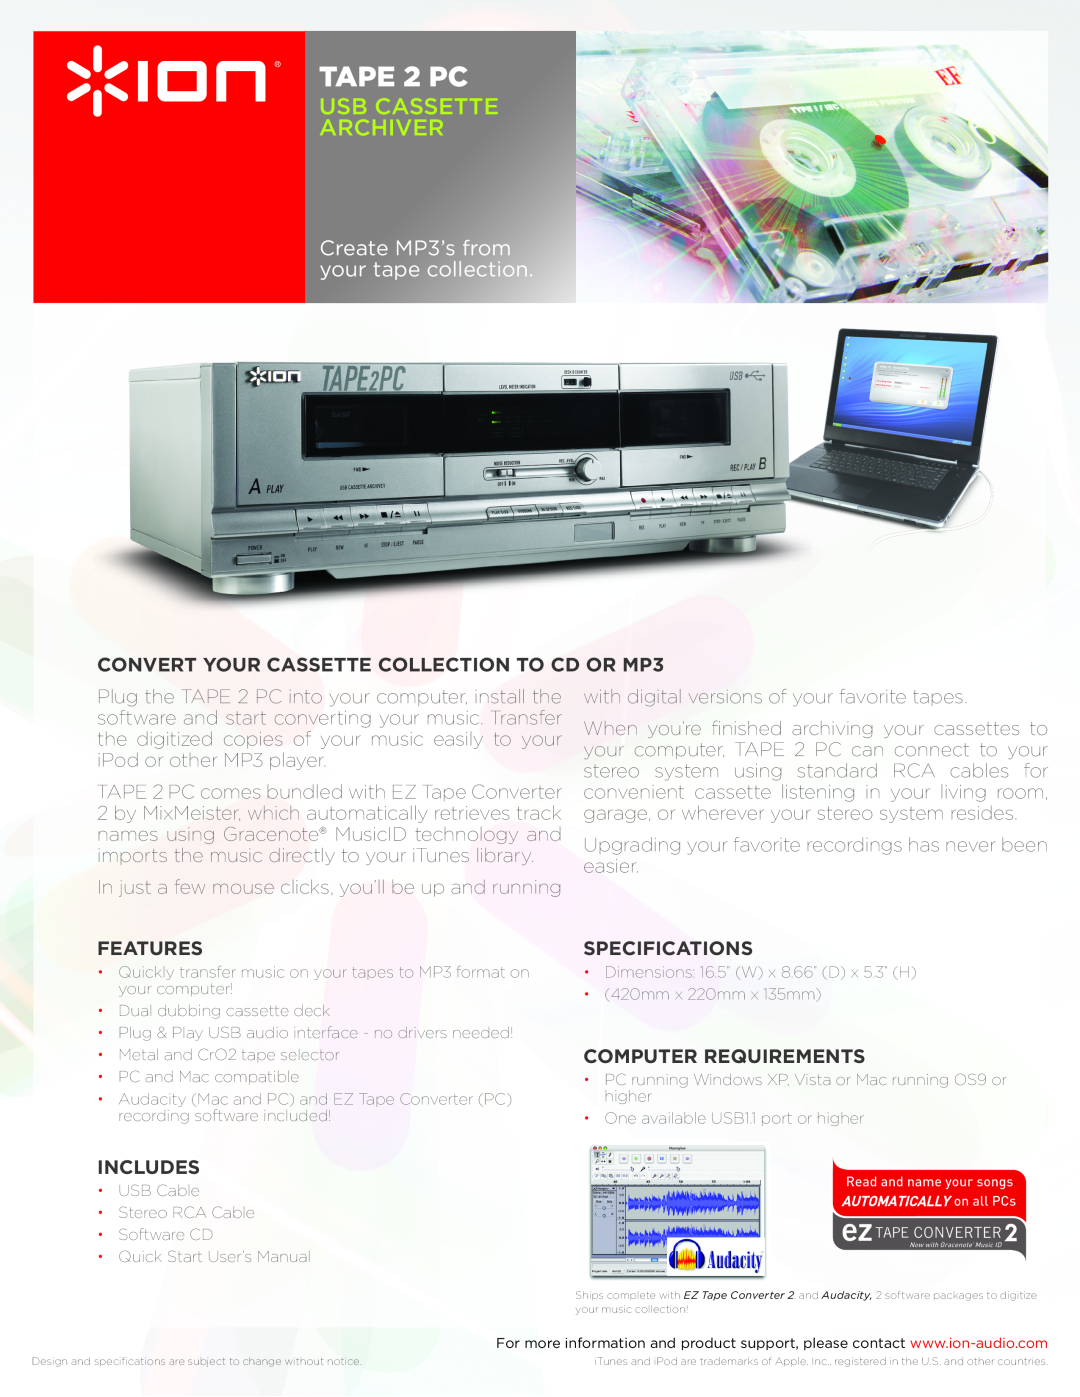 ION TAPE2PC specifications TAPE 2 PC, USB CASSETTE archiver, Create MP3’s from your tape collection, Features, Includes 